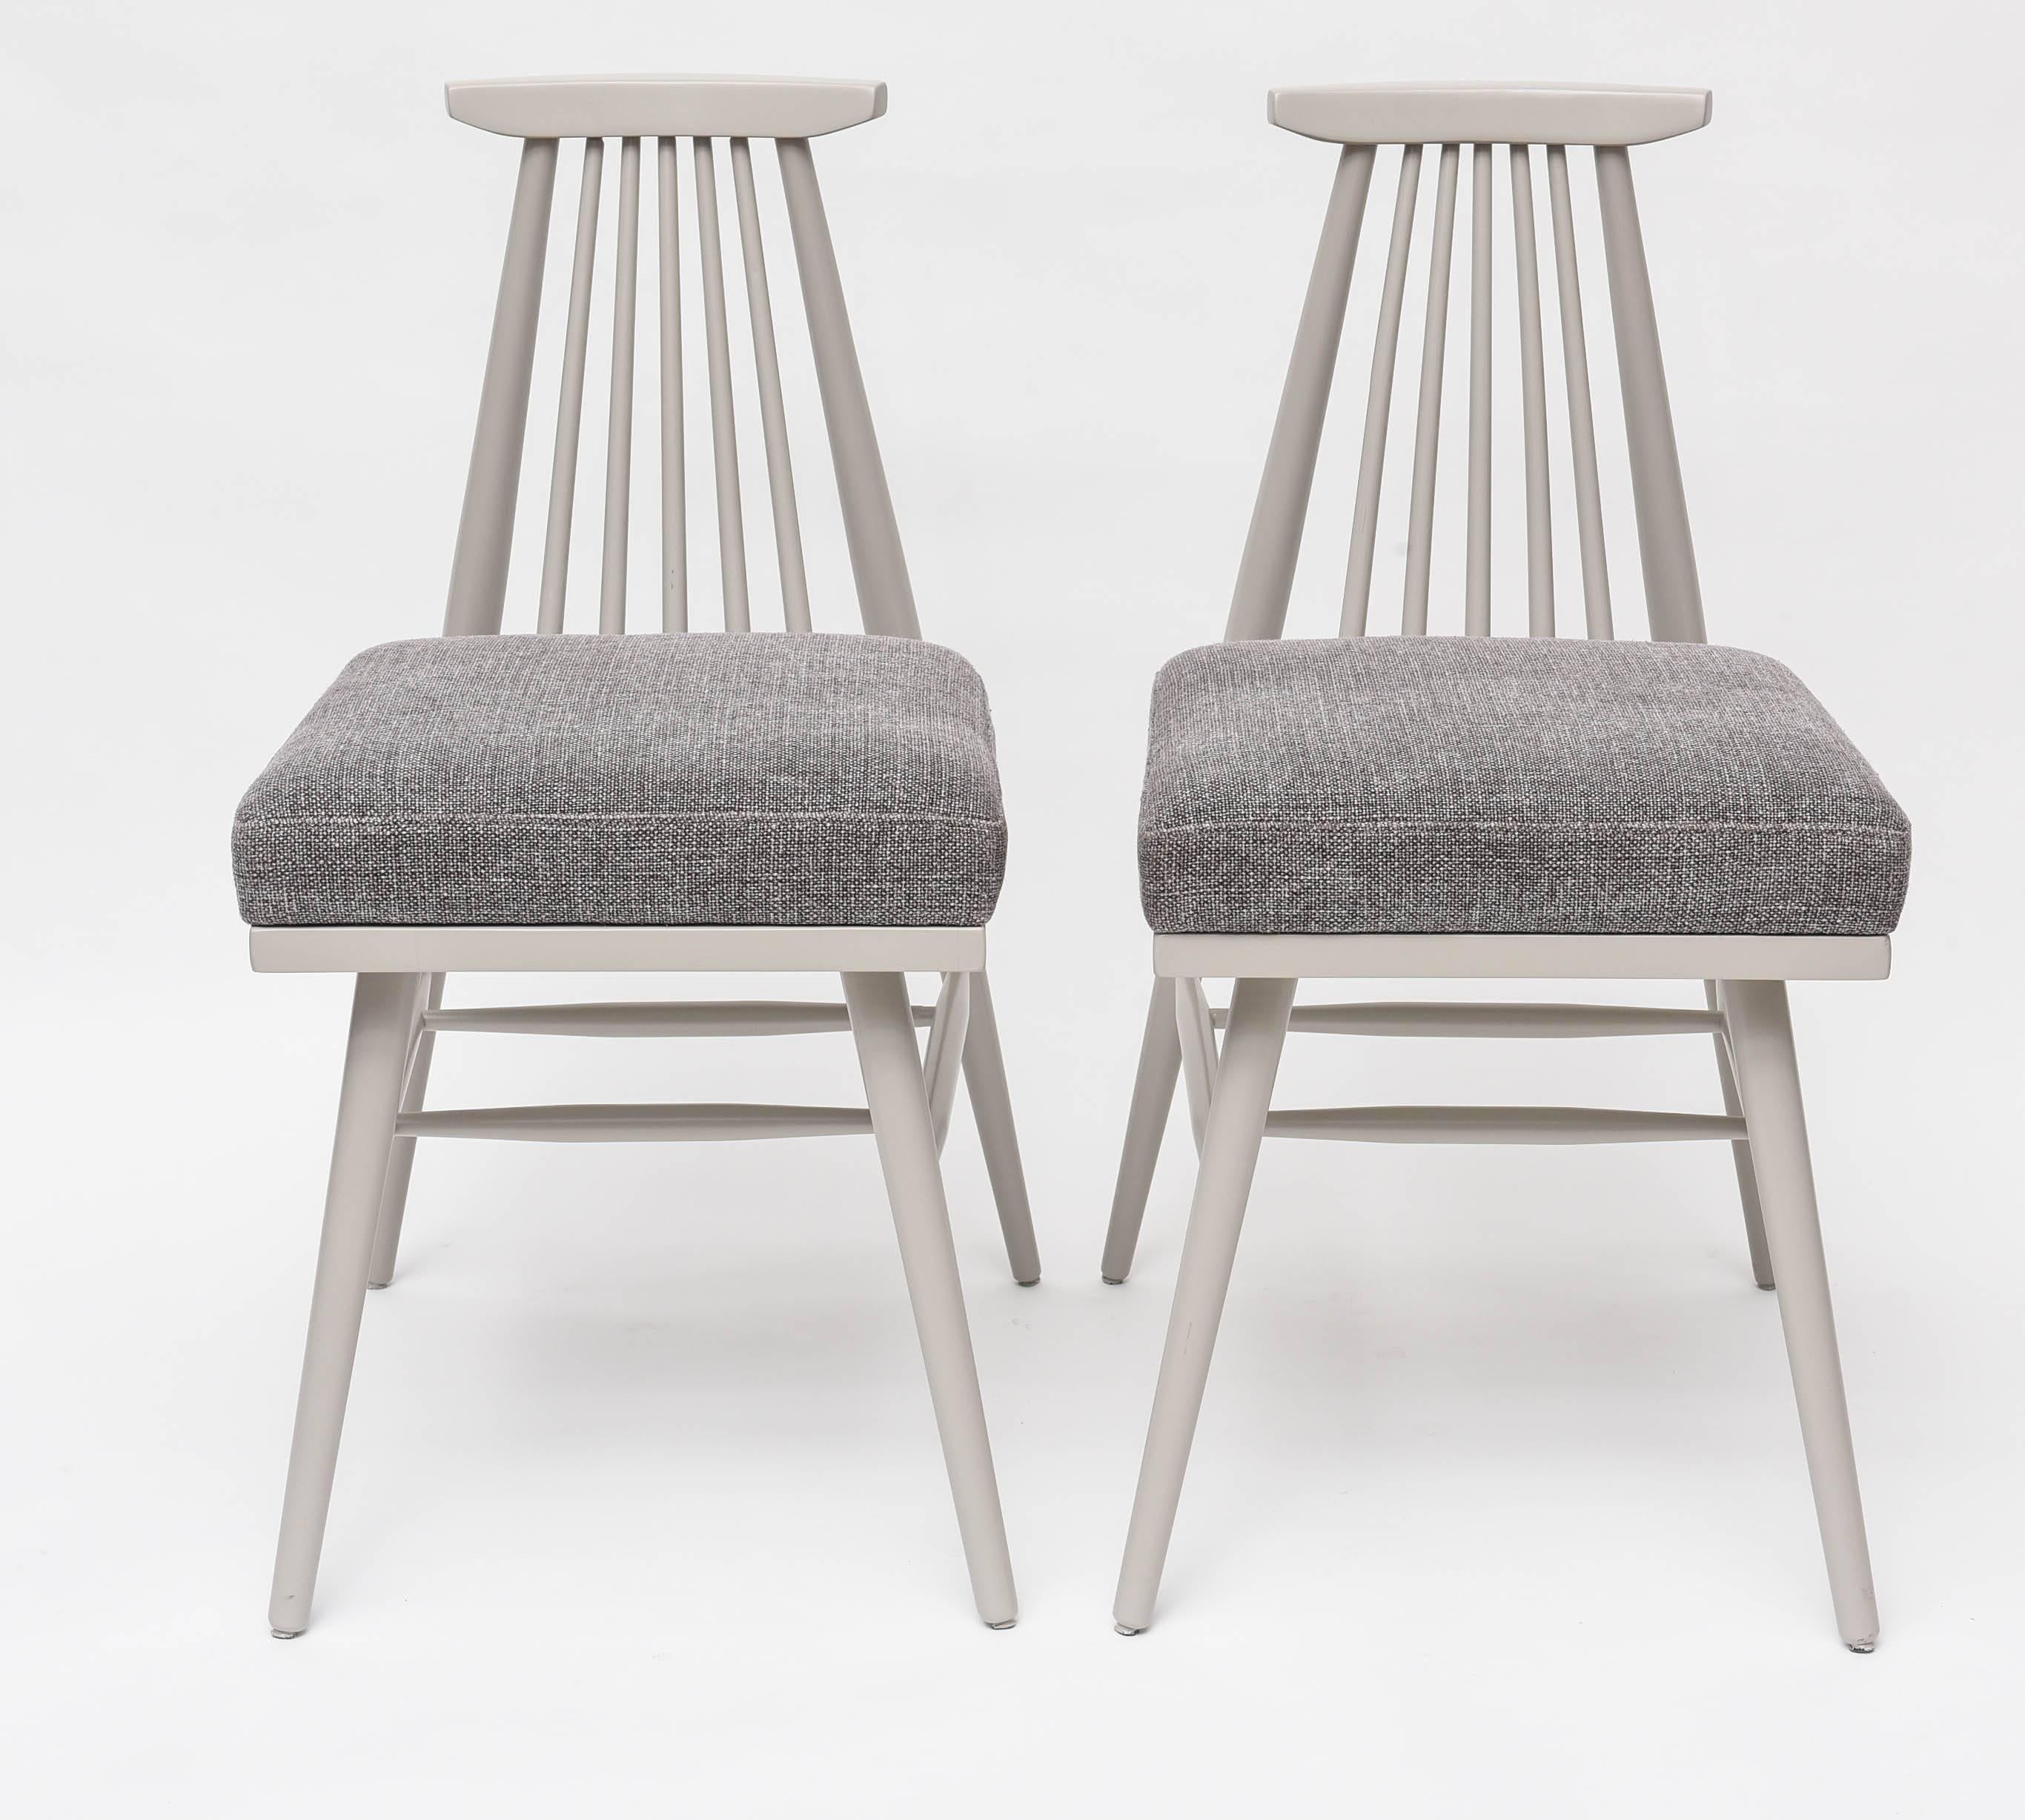 Rare Predictor dining chairs by Paul McCobb for O'Hearn Furniture, in production from 1951-1954. Gray satin finish with new mocha distressed linen upholstery.